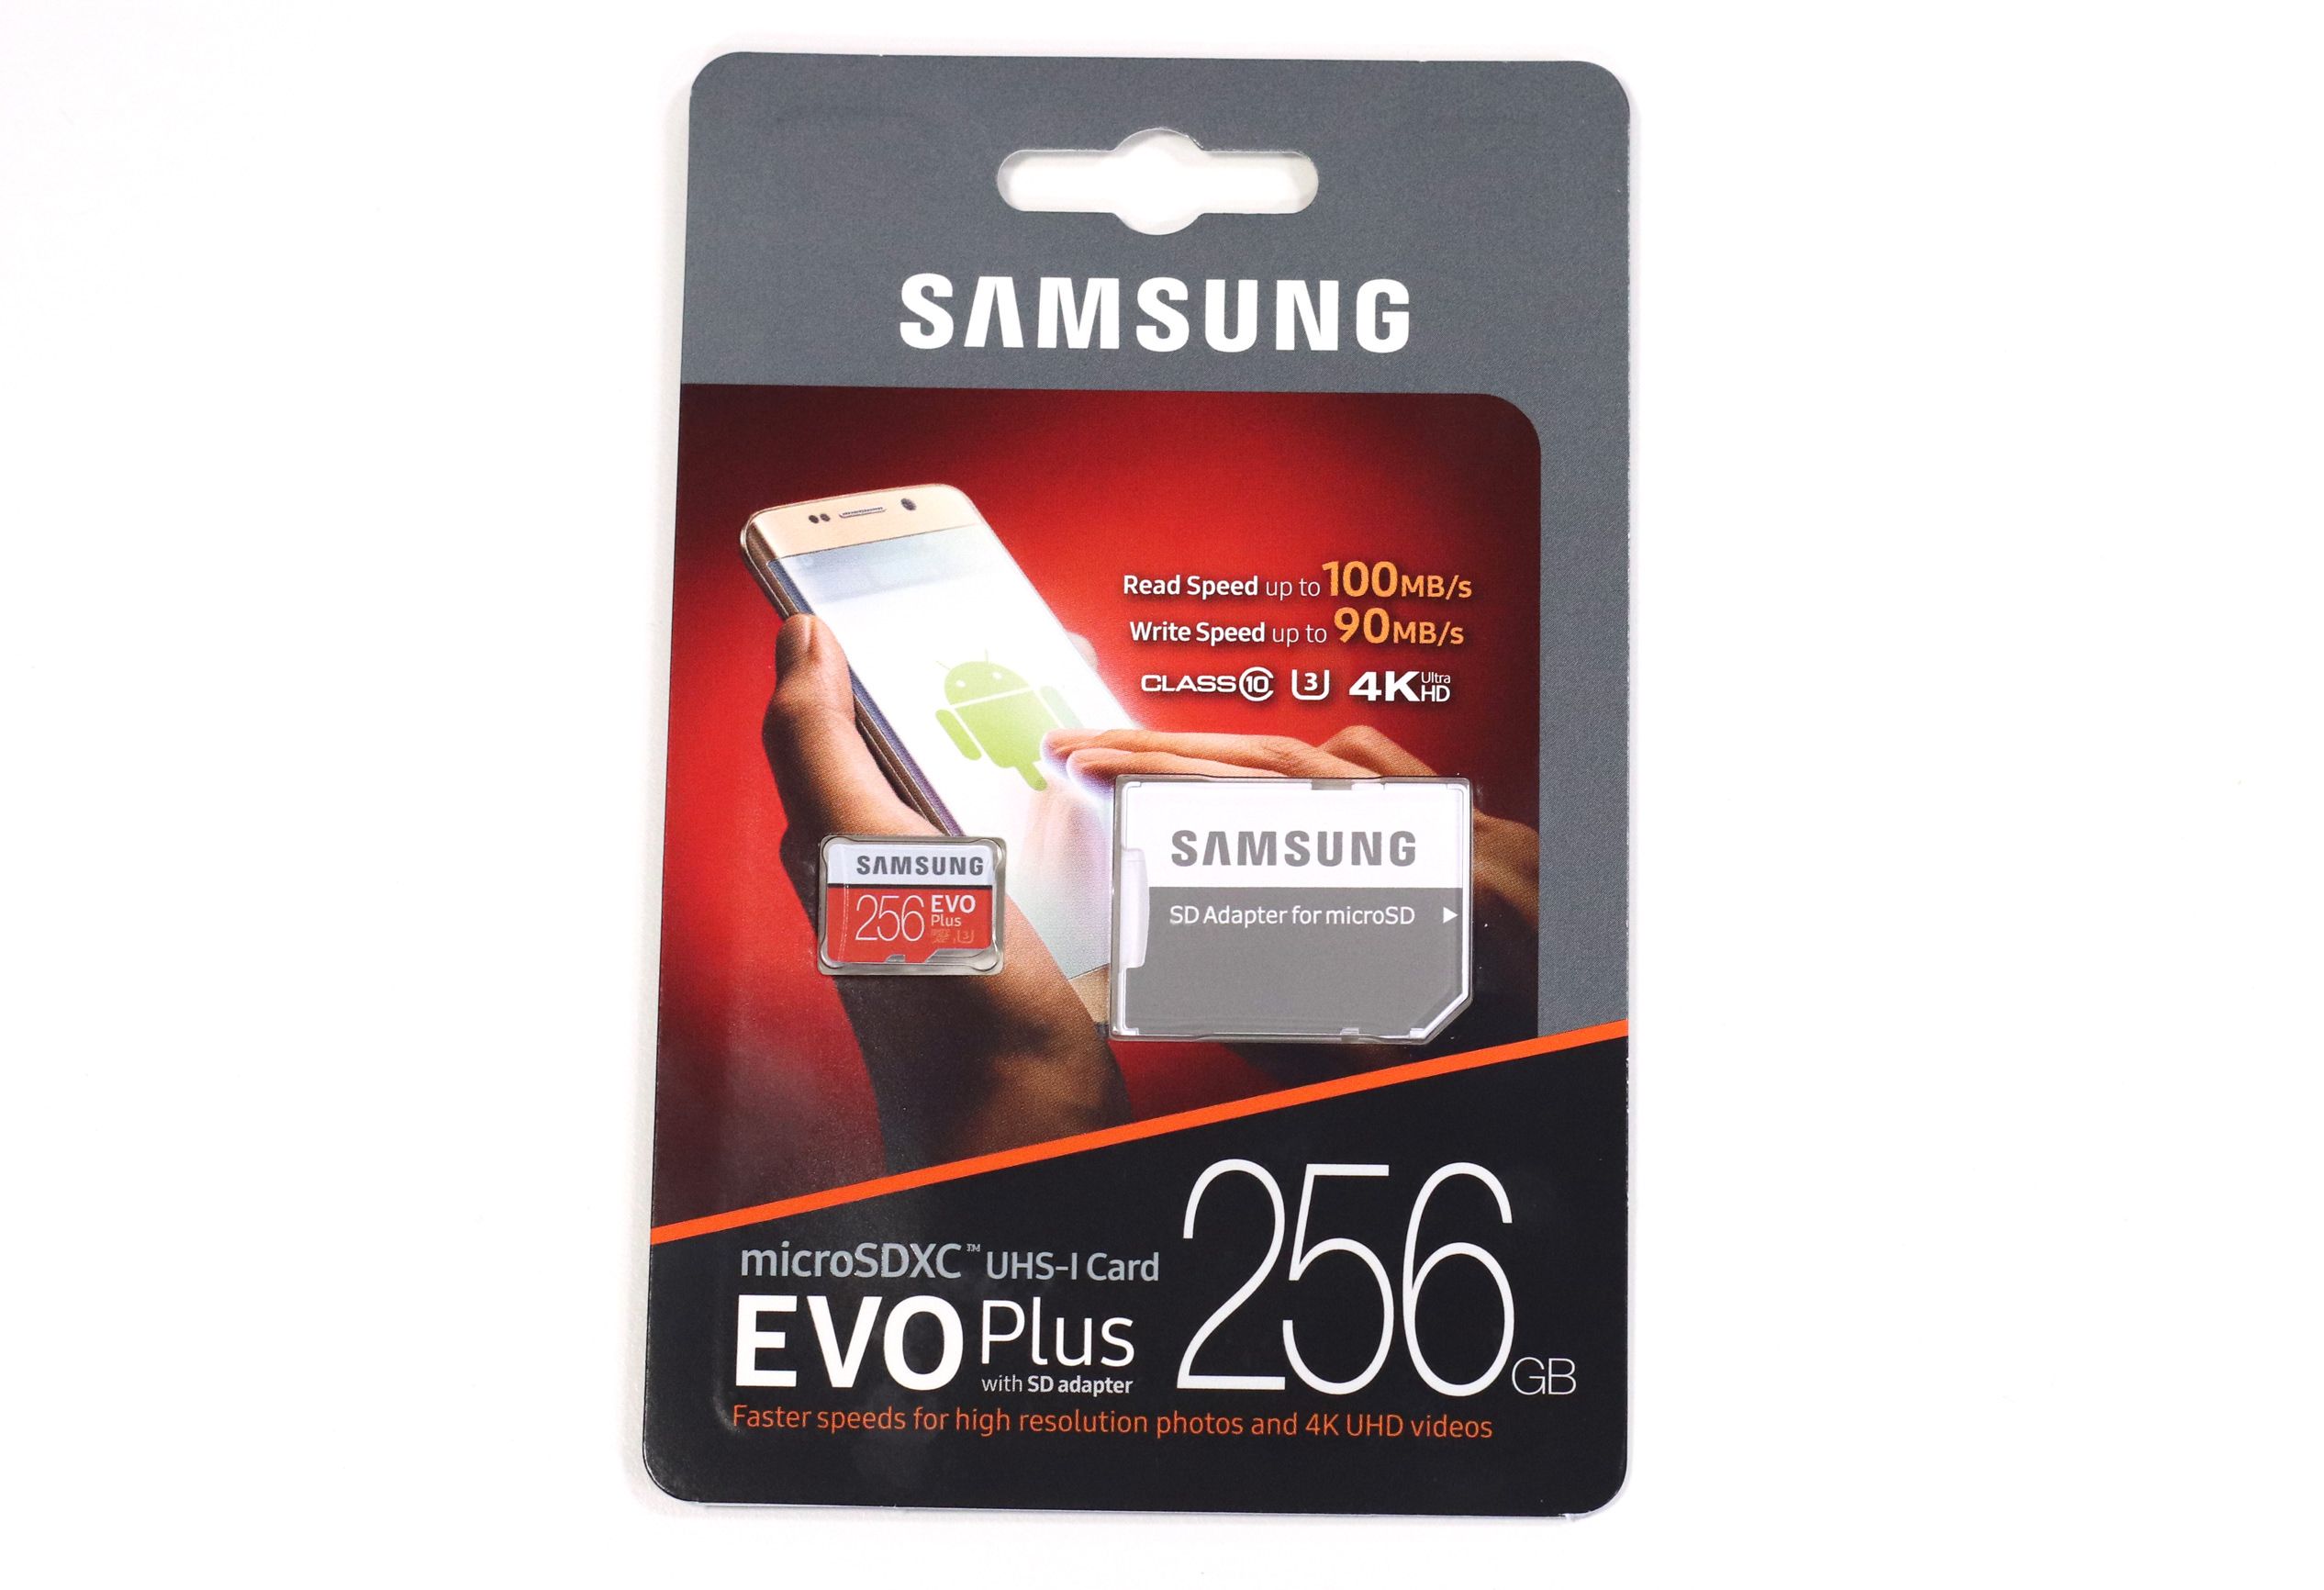 Highres Samsung Evo Plus 256mb Adapter Package 1494334891